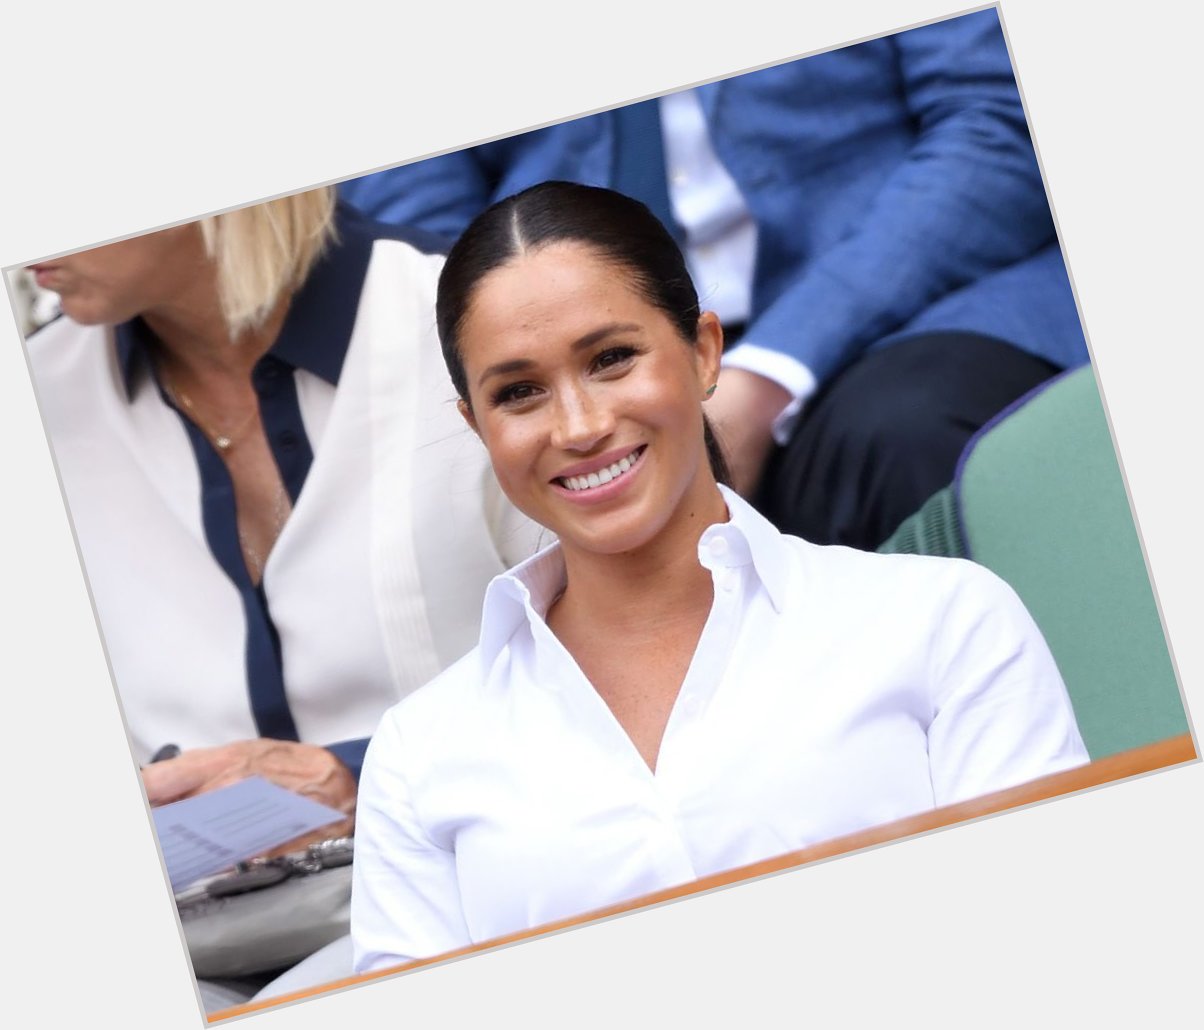 Happy Birthday Meghan Markle!!! We wish you nothing but the best.    